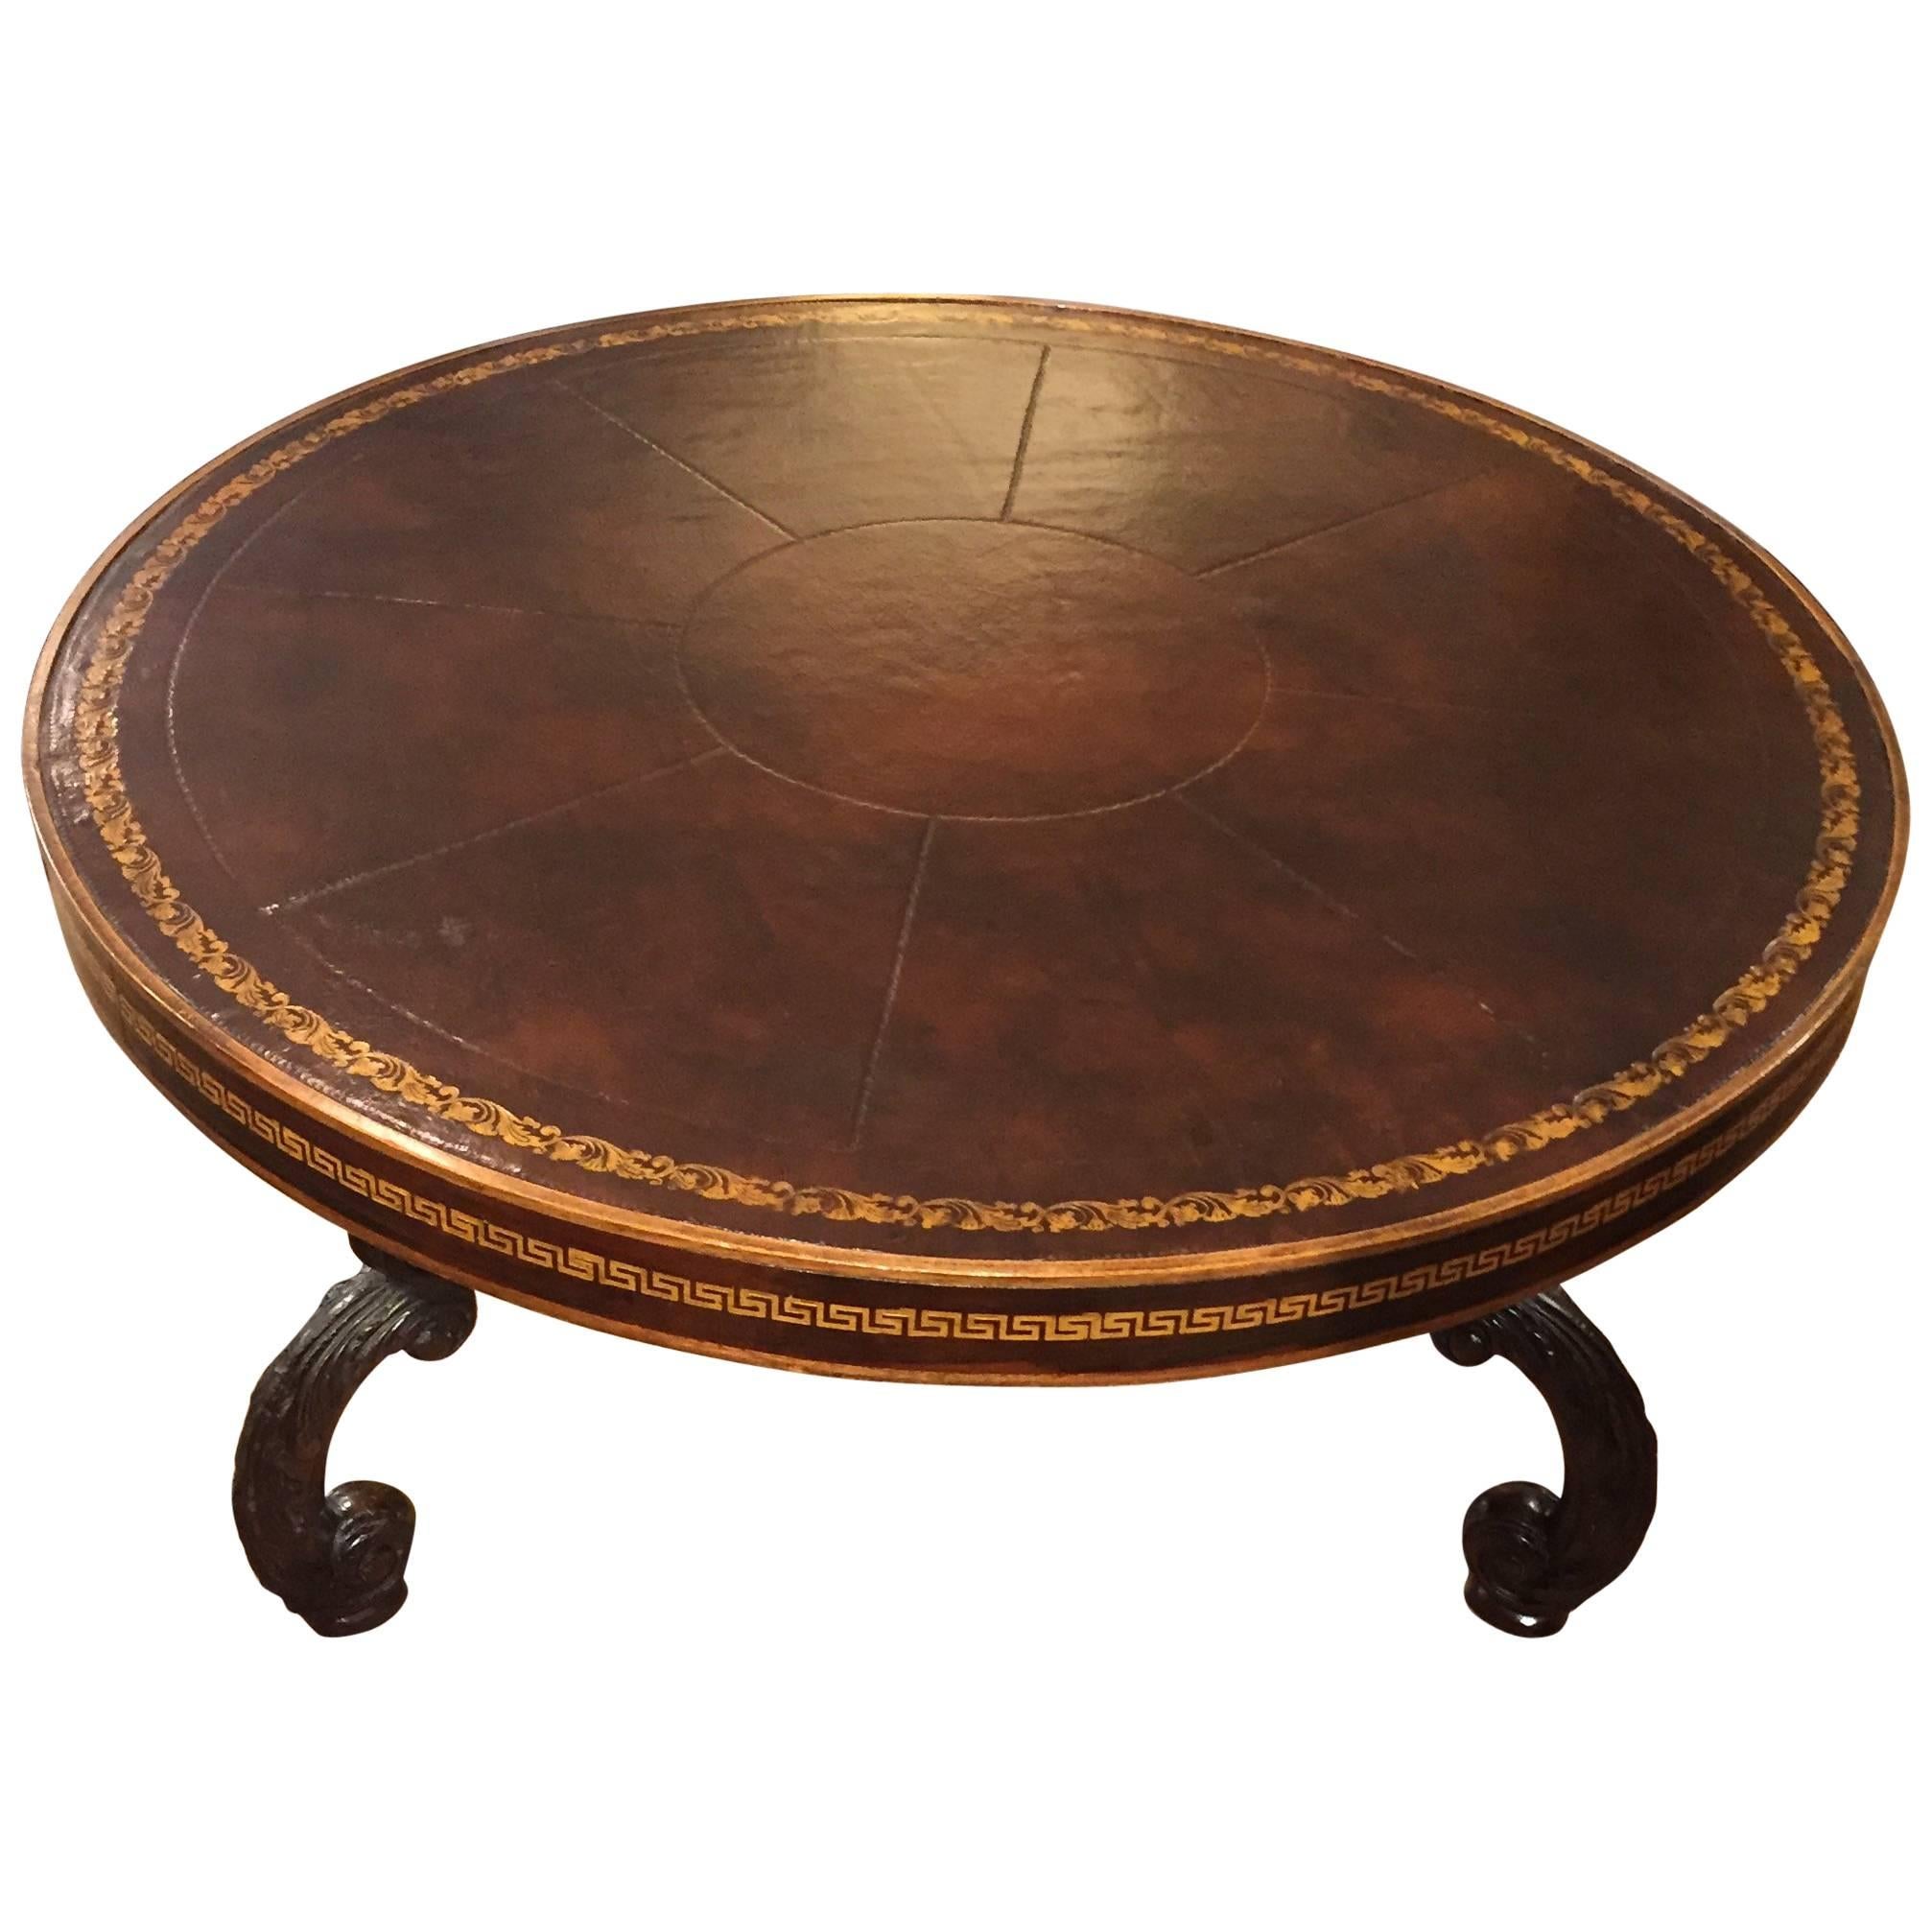 Handsome Tooled Leather Round Coffee Cocktail Table with Greek Key Design